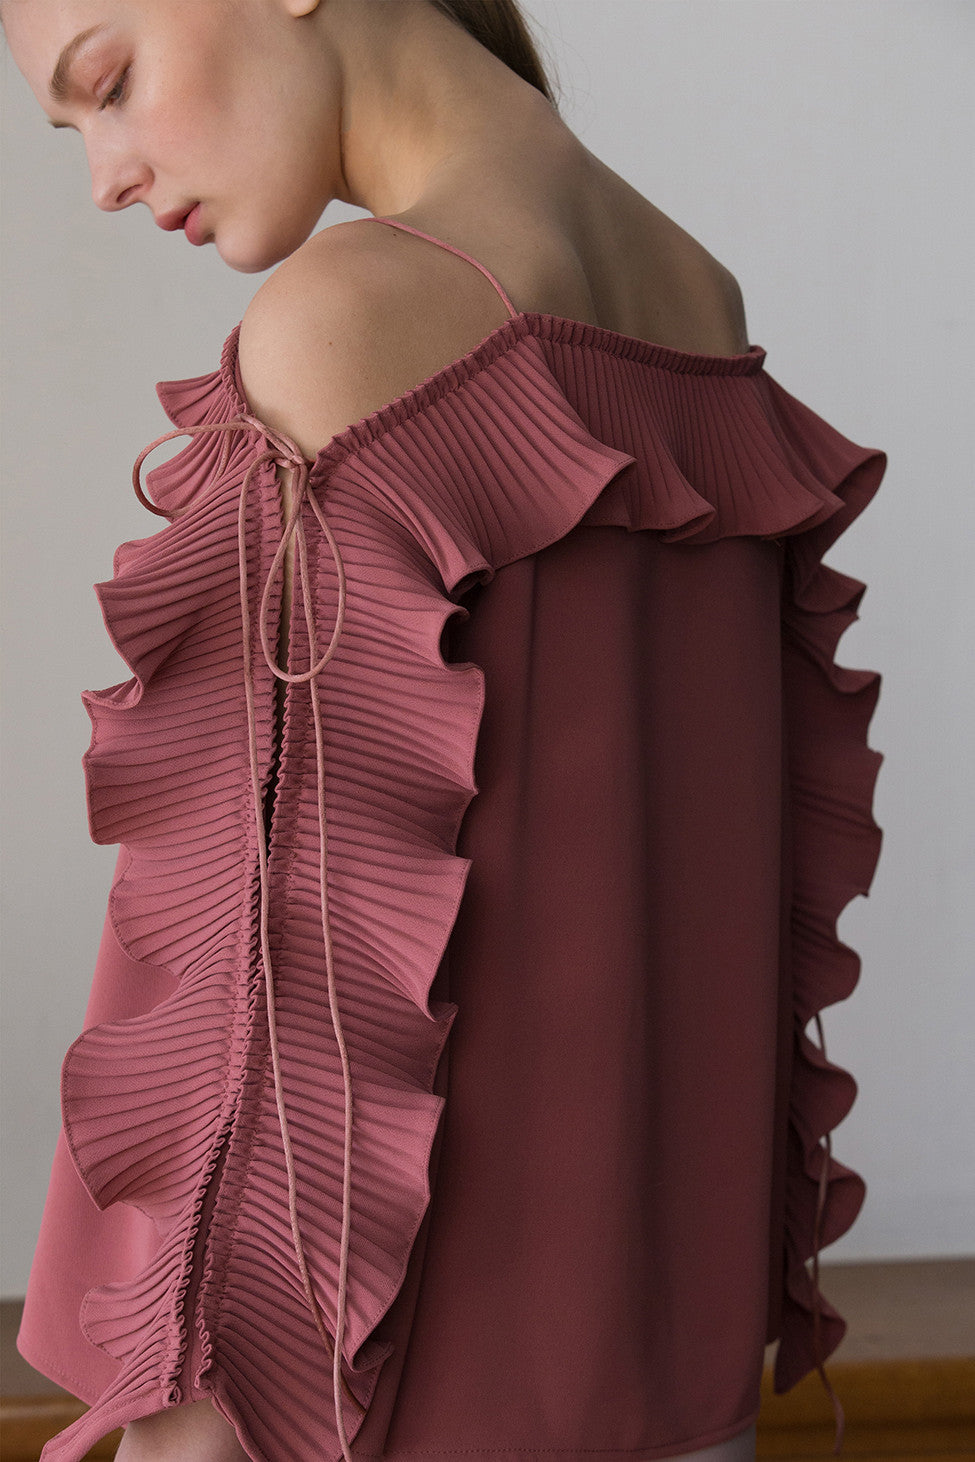 The Calin Top in Pink, featuring thin straps, square neckline, dimple sleeves in ruffle detailing with self-tie. Pull on.